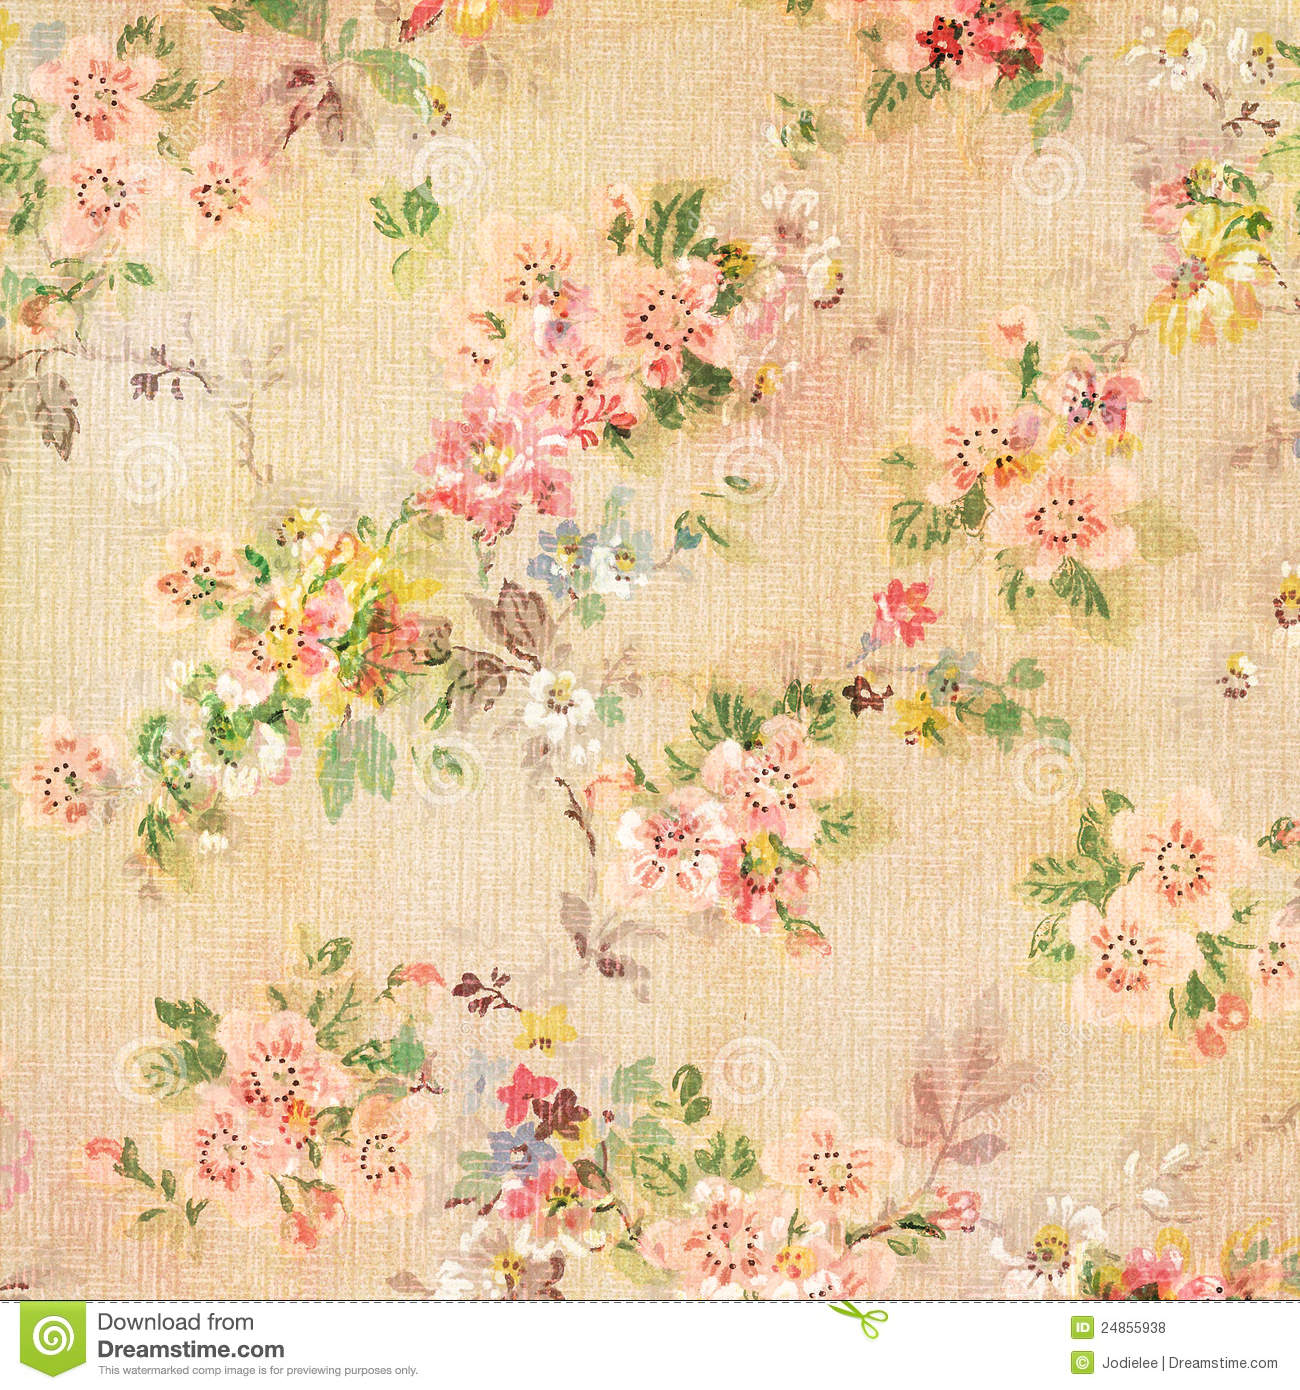 Shabby Chic Flowers Wallpaper Vintage Antique